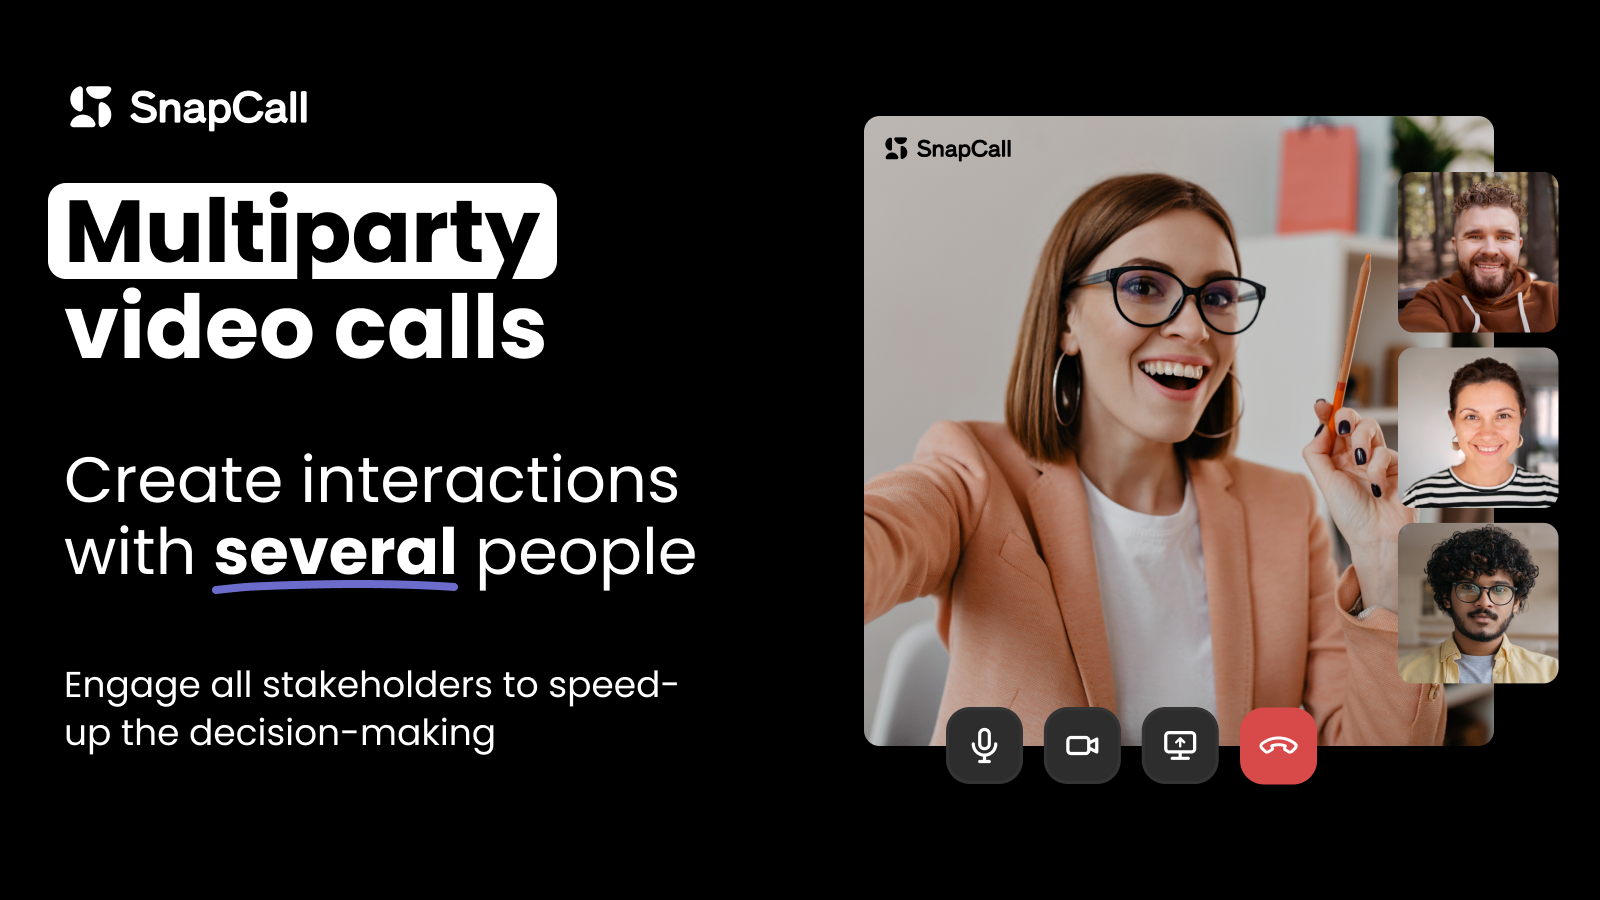 Multiparty video calls